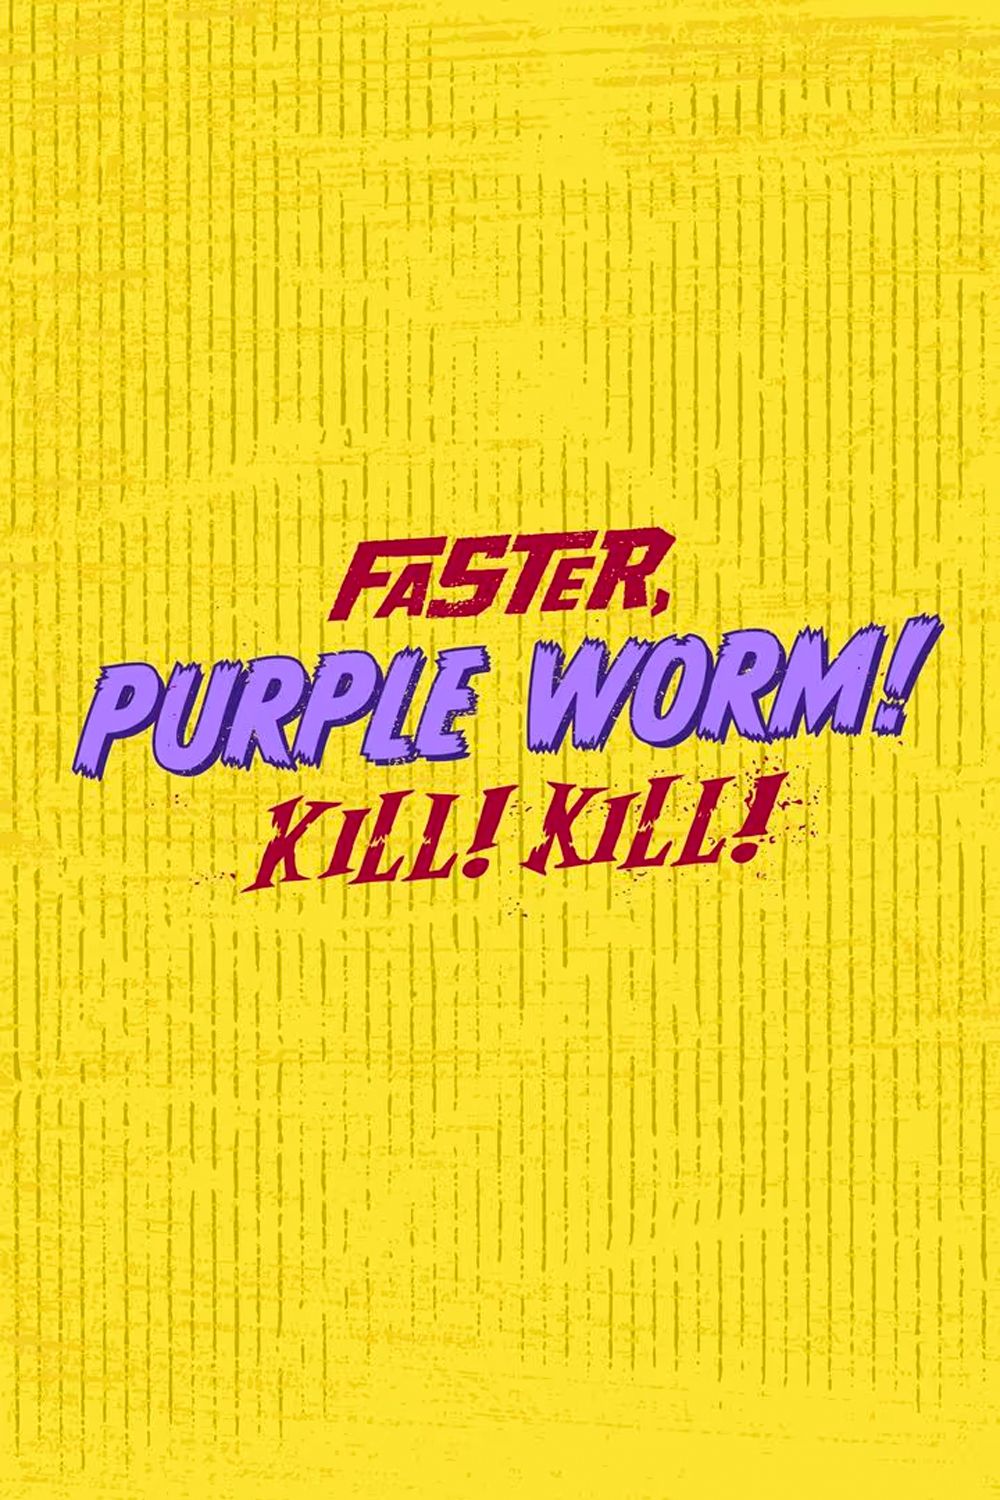 Faster Purple Worm Kill Kill Logo poster on a yellow background